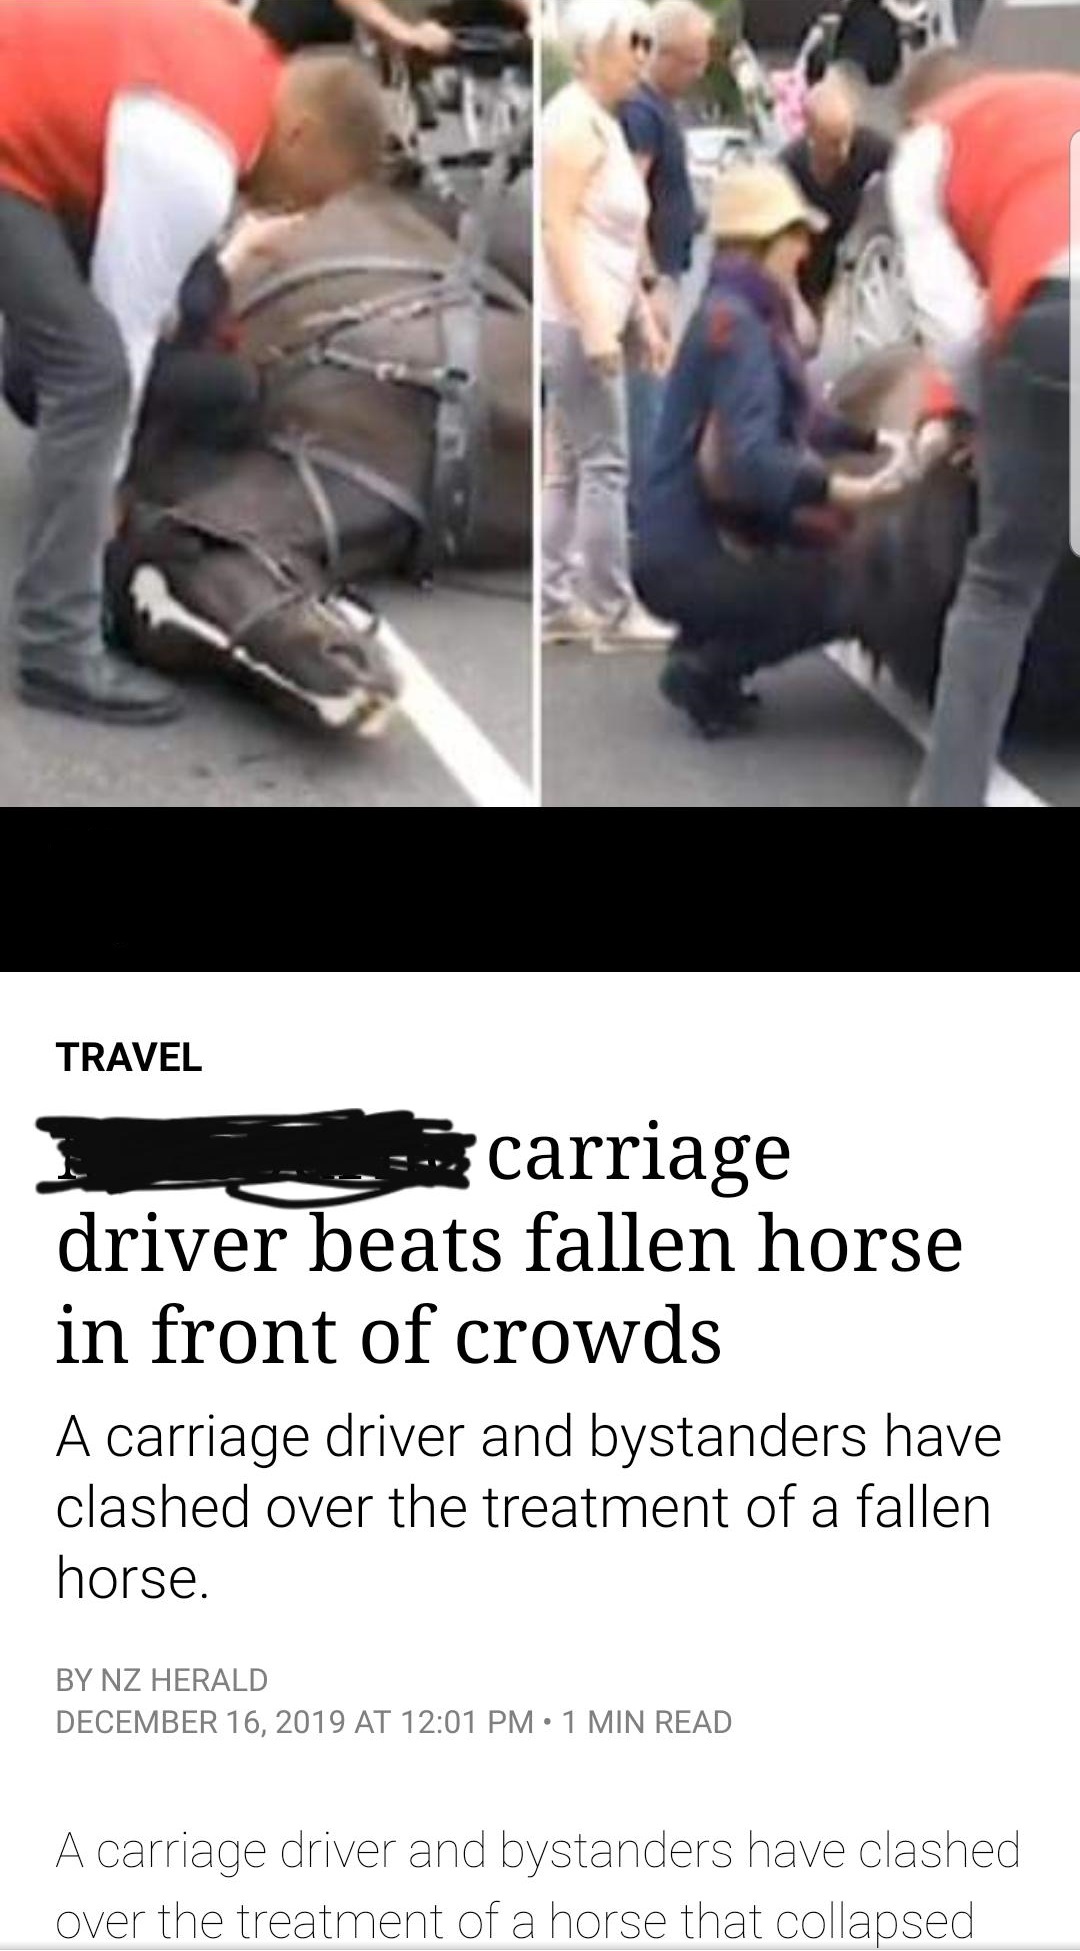 d3media - Travel carriage driver beats fallen horse in front of crowds A carriage driver and bystanders have clashed over the treatment of a fallen horse. By Nz Herald At 1 Min Read A carriage driver and bystanders have clashed over the treatment of a hor